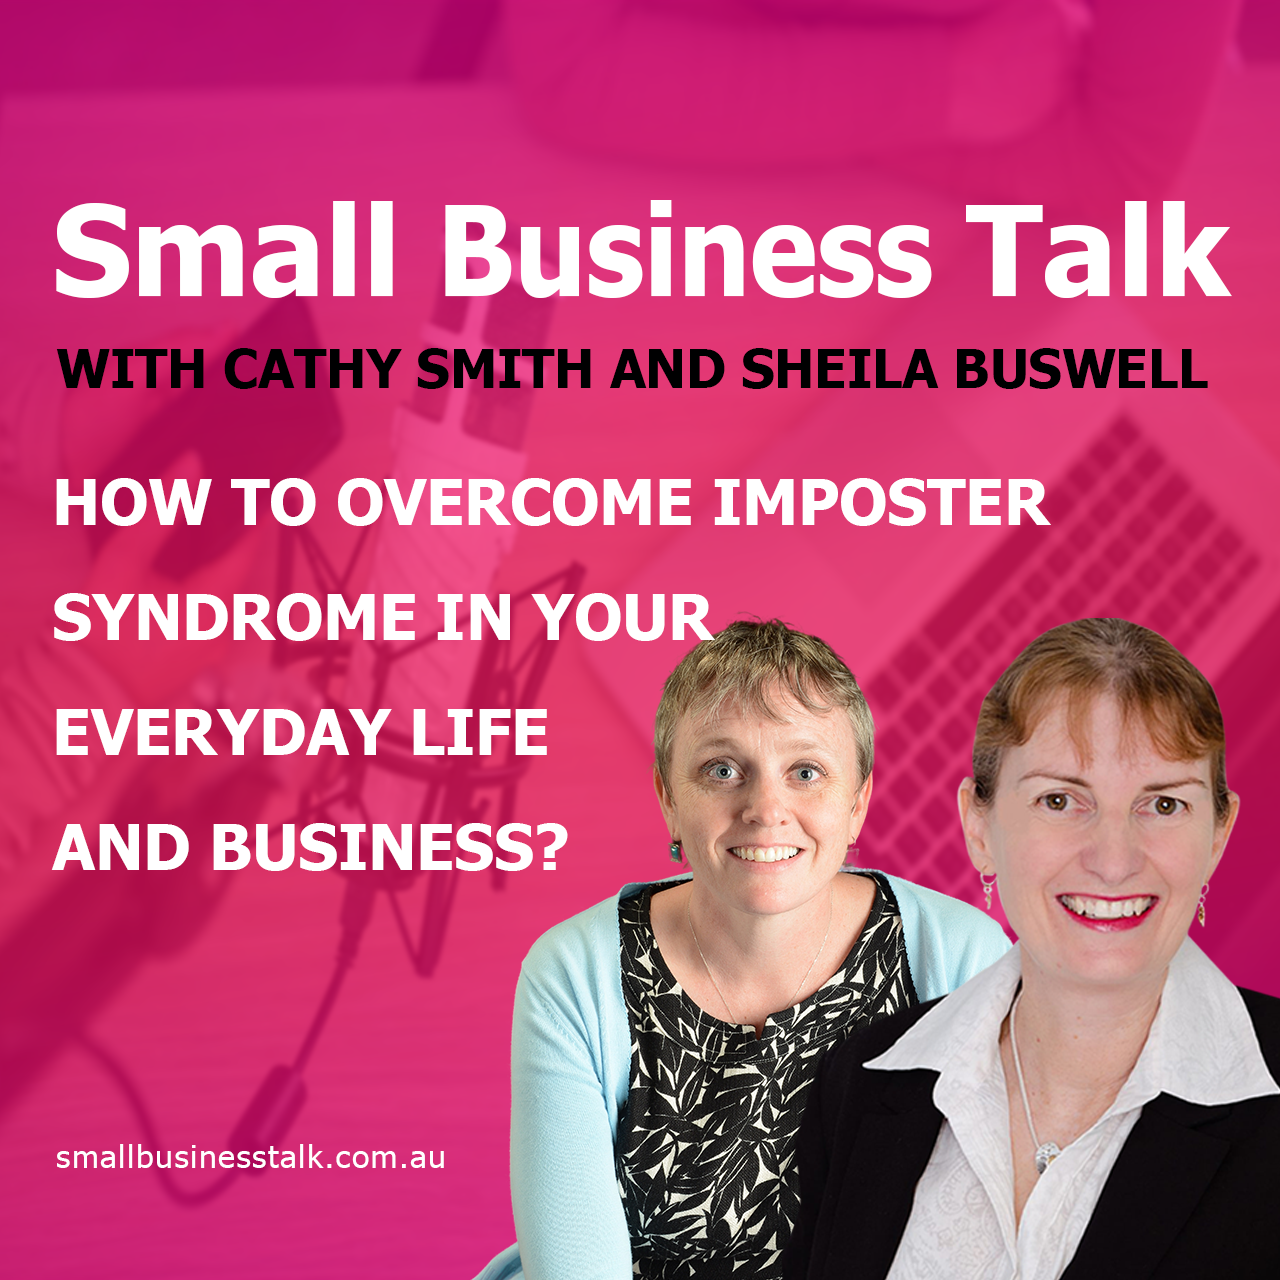 How to overcome imposter syndrome in your everydaylife and business with Cathy Smith and Sheila Buswell